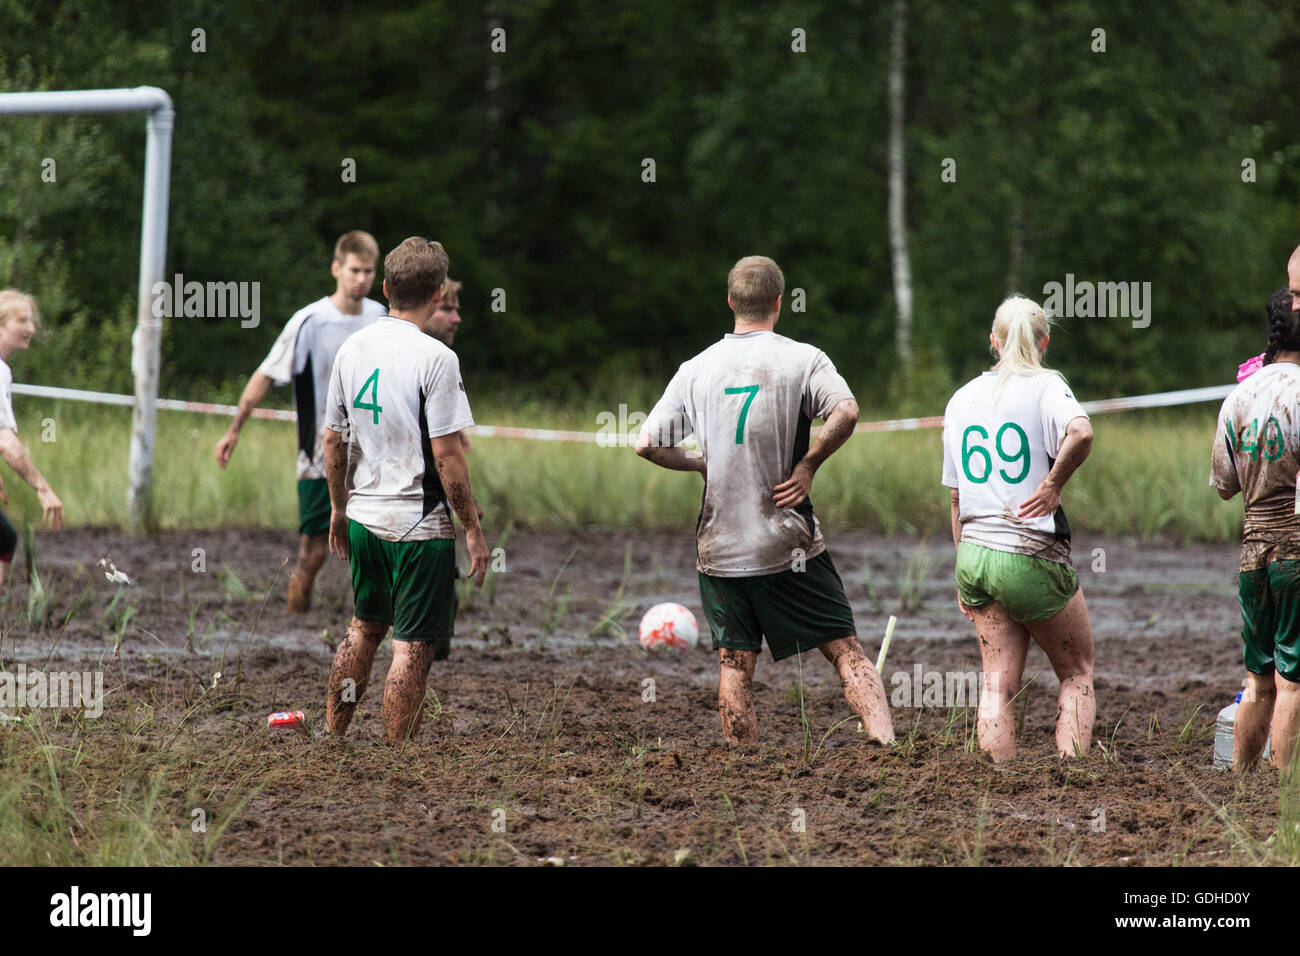 Hyrynsalmi, Finland, July 16 2016. The Swamp Soccer World Championship 2016 at Ukkohalla in Hyrnsalmi. About 2000 competitors take part every year in the world's oldest swamp soccer tournament. Pictured: Action and crowd scenes from the knockout stages on the rainy second day. Credit:  Rob Watkins/Alamy Live News Stock Photo